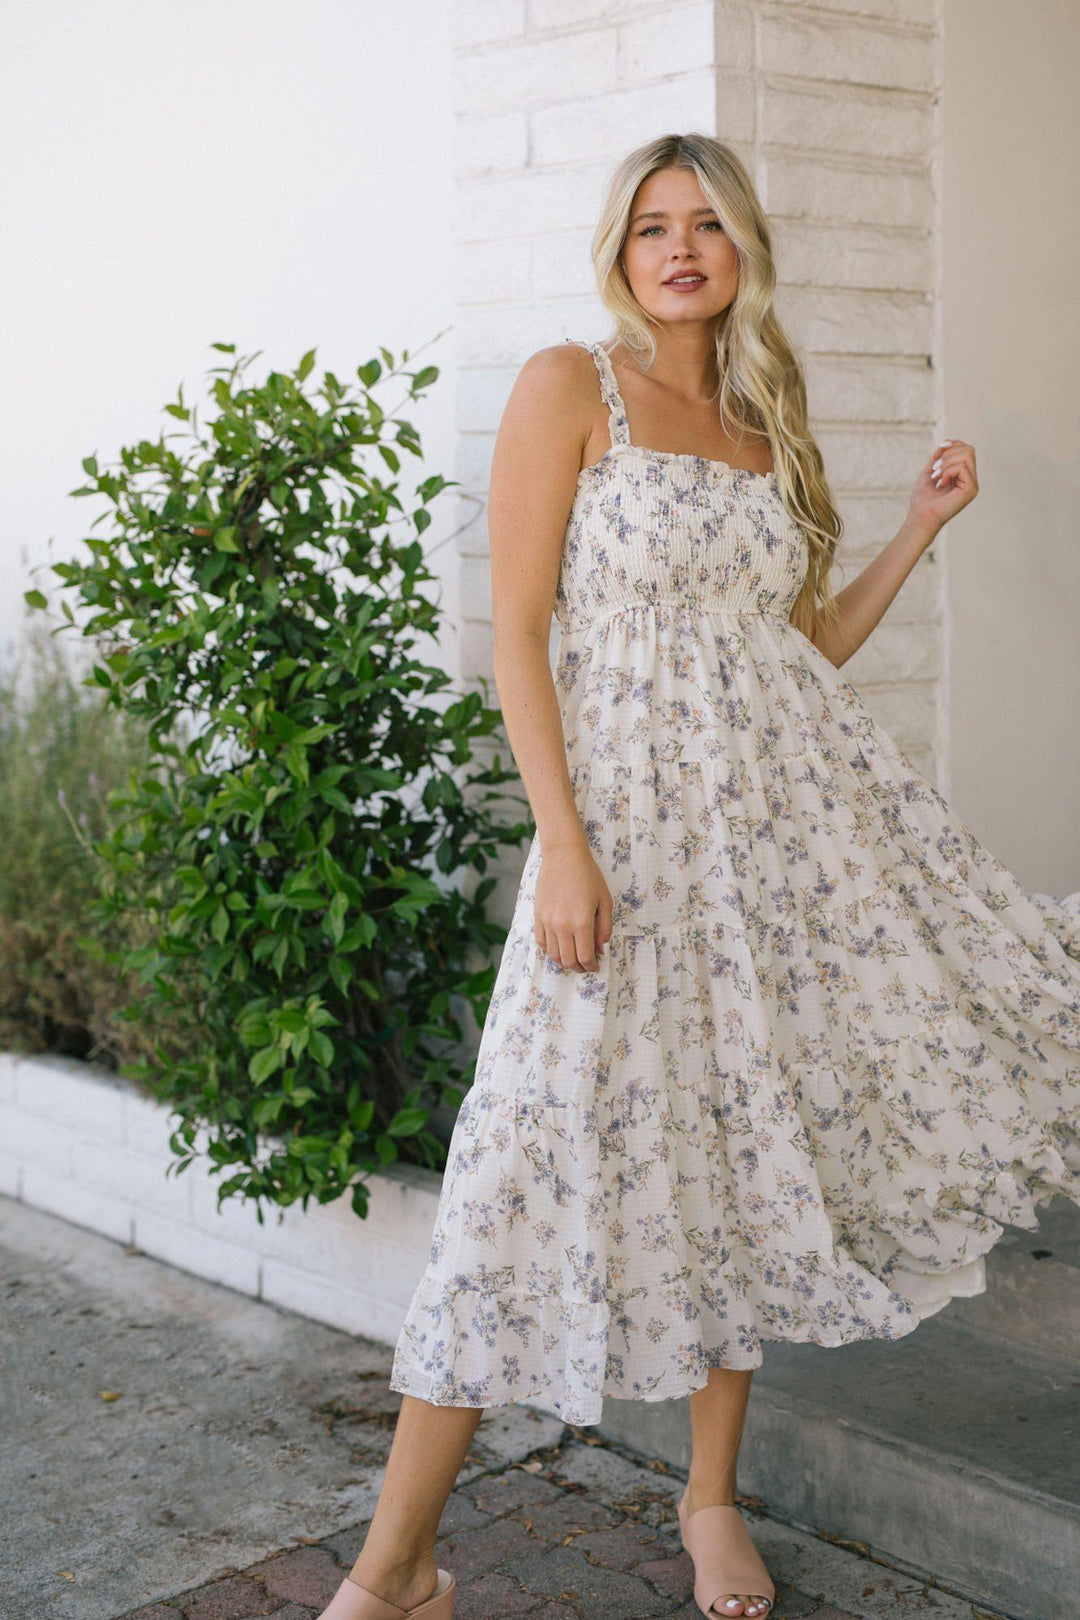 This pretty smocked dress looks just like Free People's popular